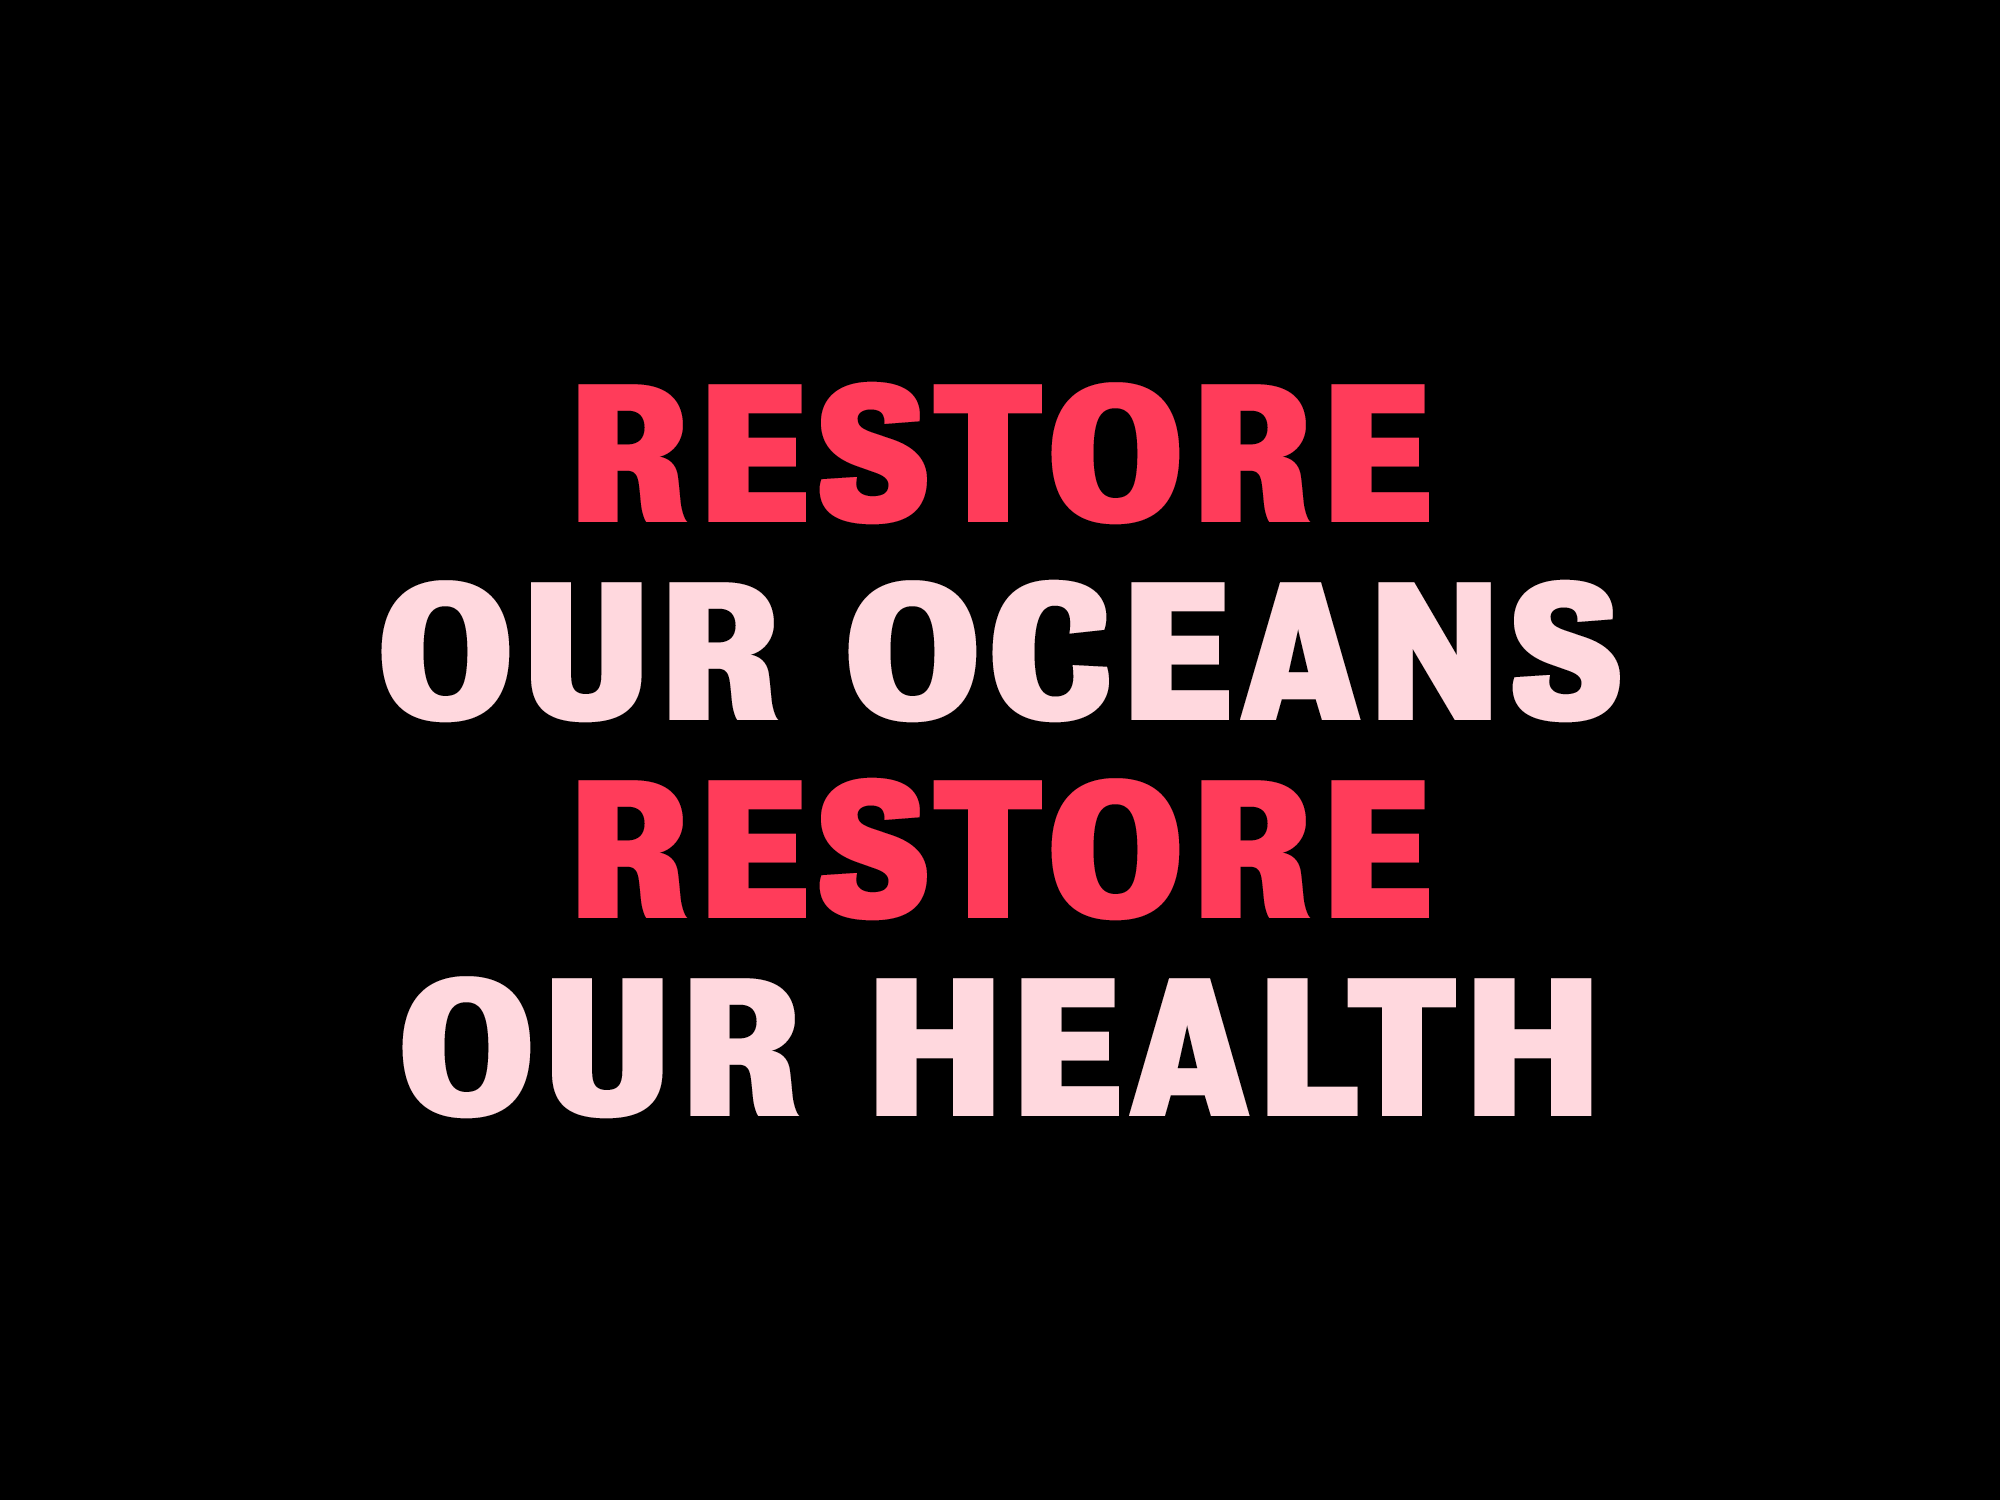 WHEN WE RESTORE OUR OCEANS, WE RESTORE OUR OWN HEALTH